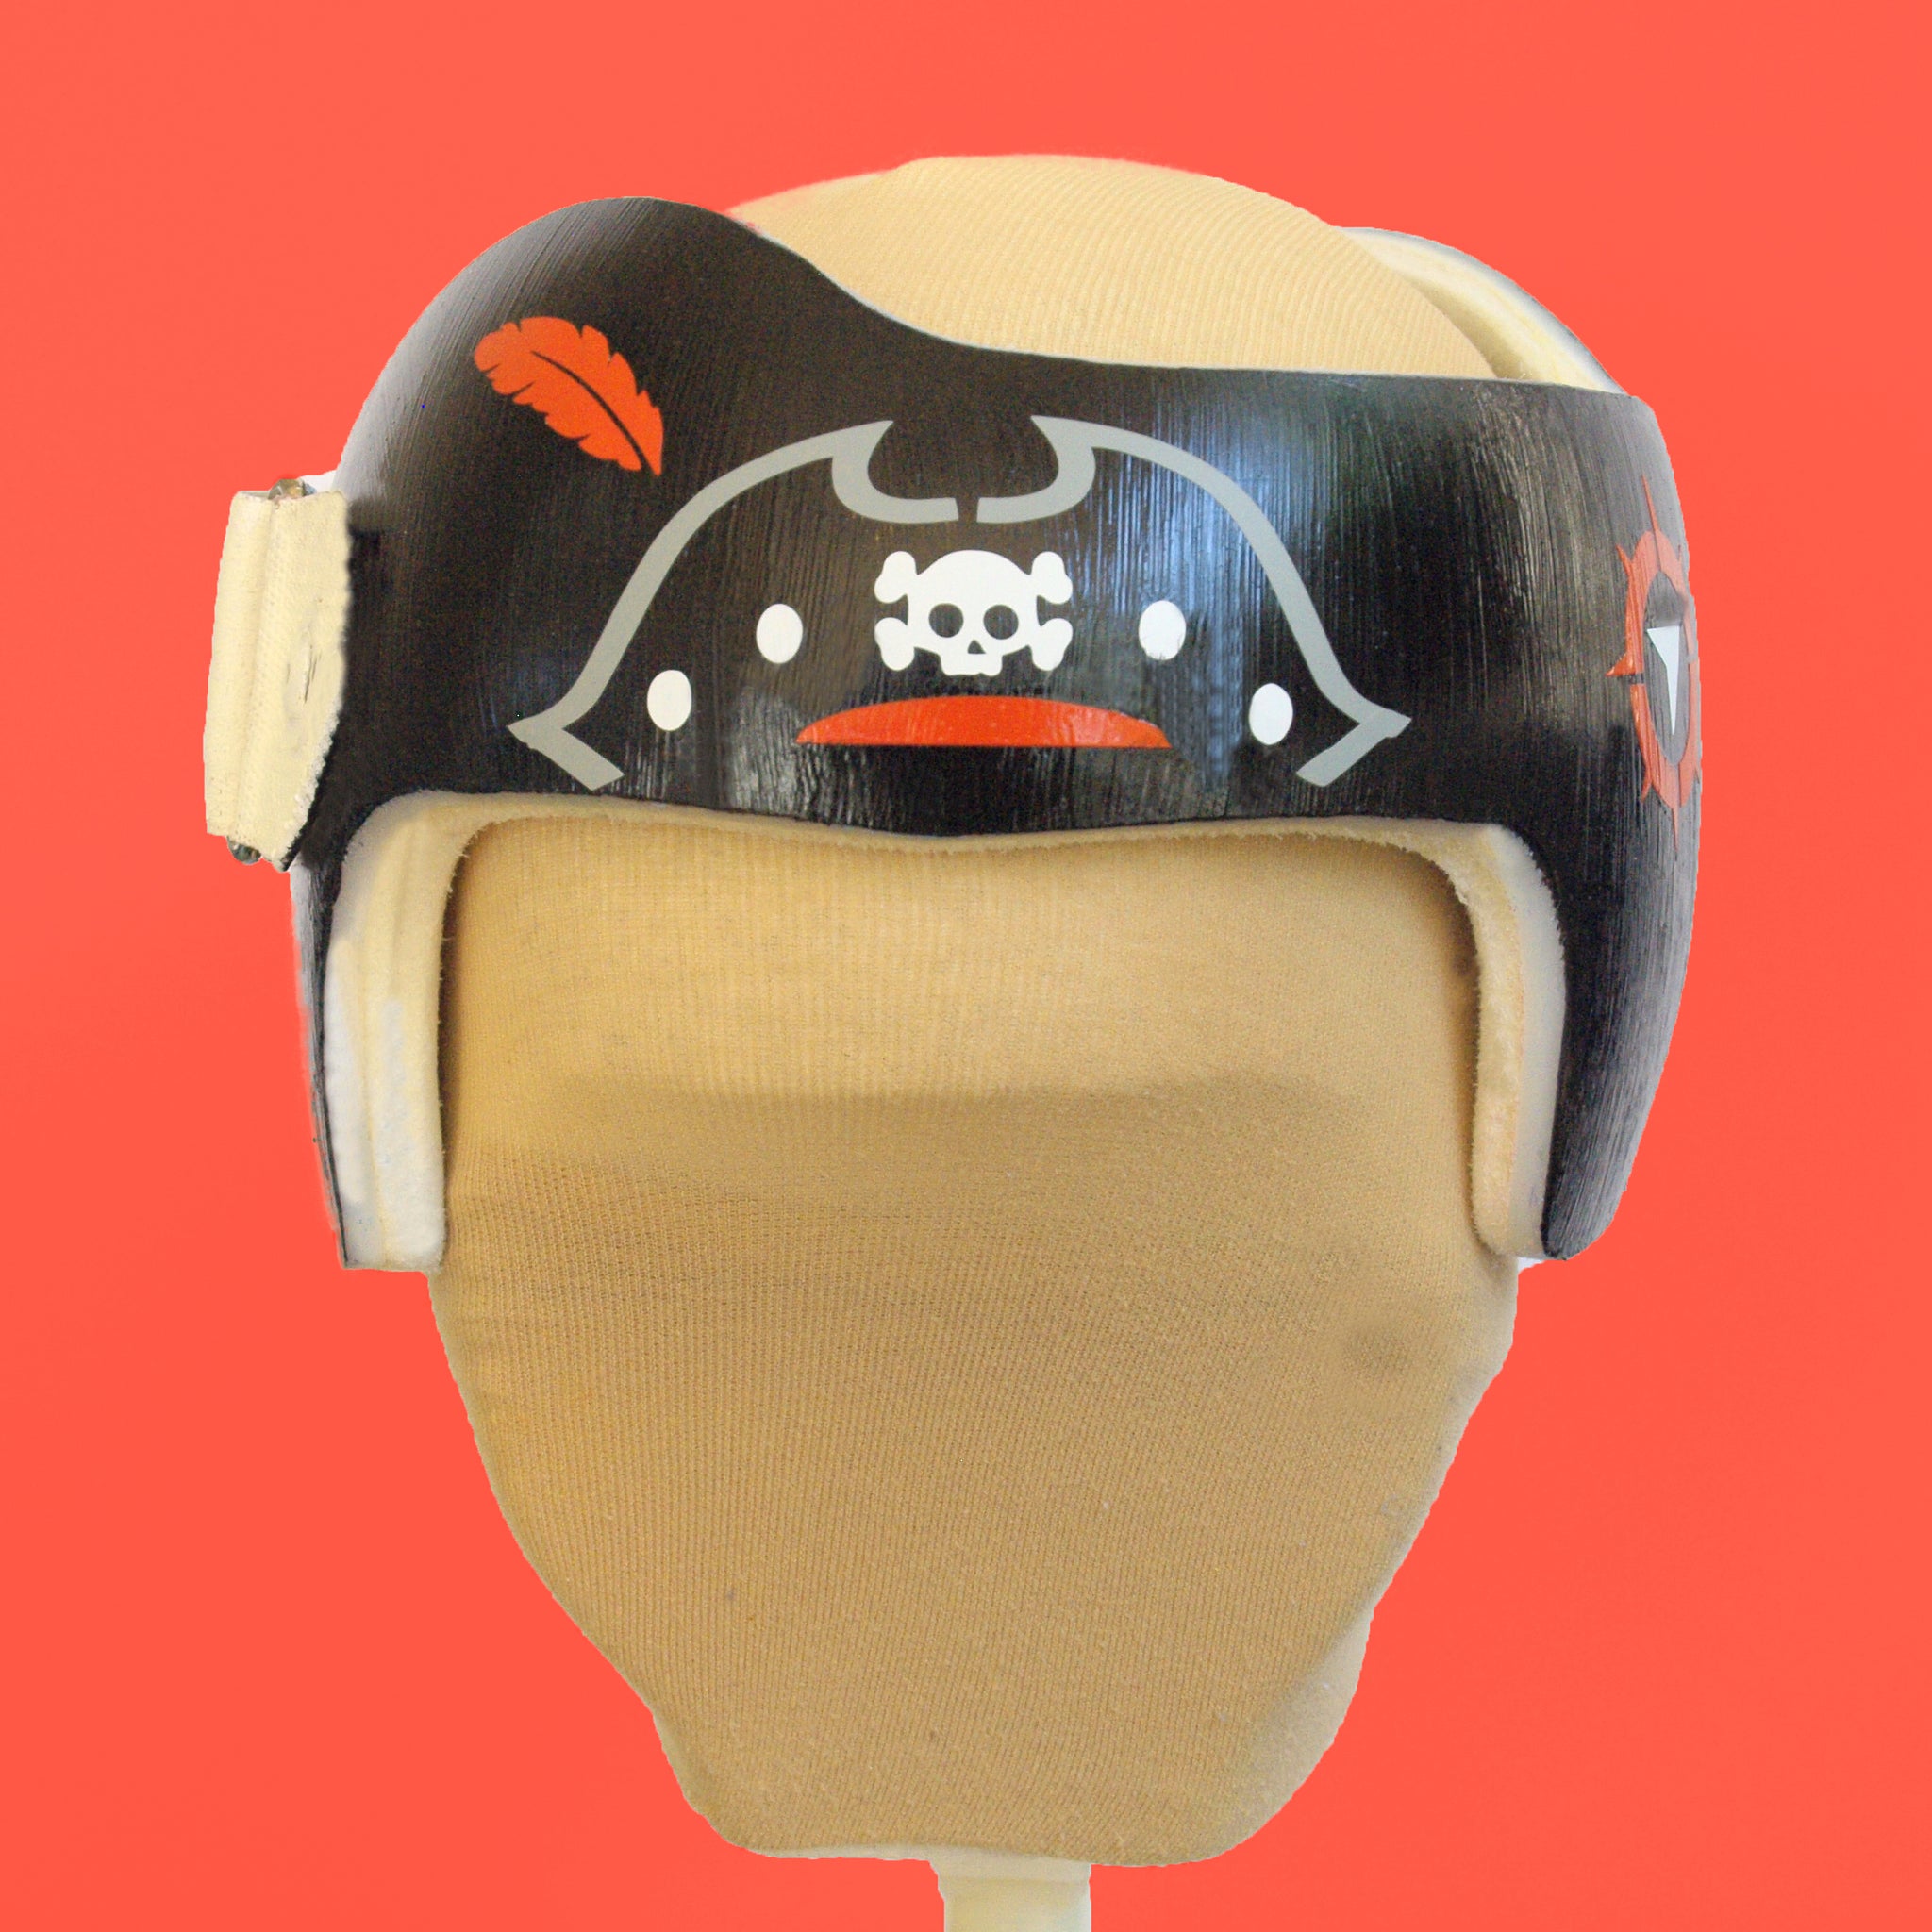 Decorate Your Doc Band Yourself- Cranial Band Decals & Painting